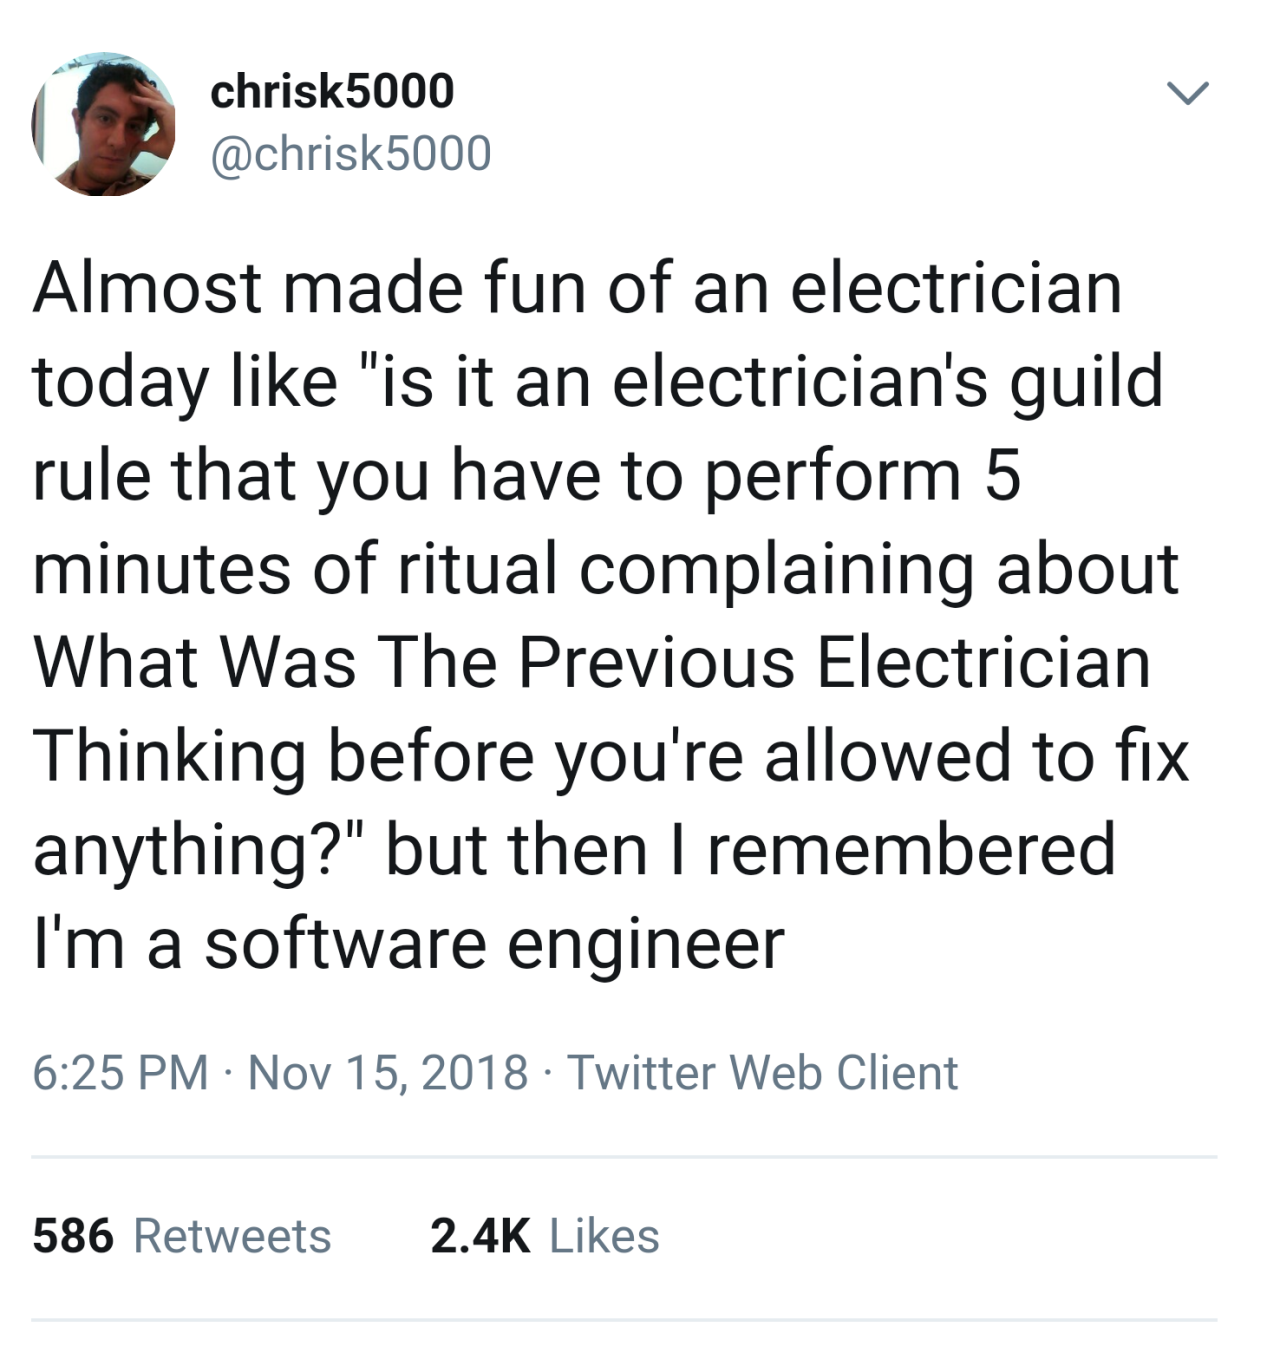 programmerhumour:
““What was the previous electrician thinking?” ”